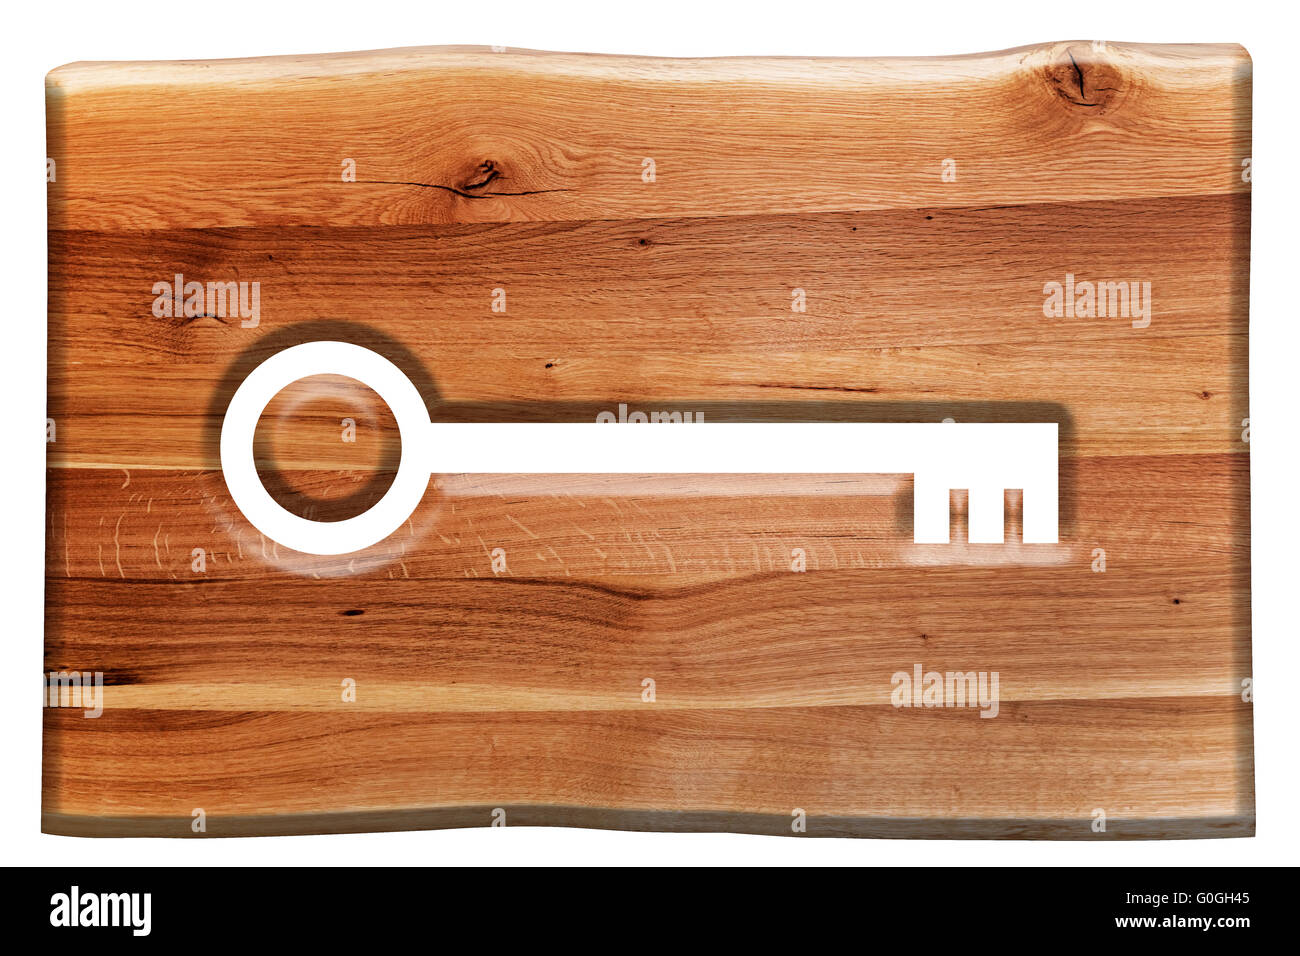 Key symbol cut in wooden board isolated on white Stock Photo